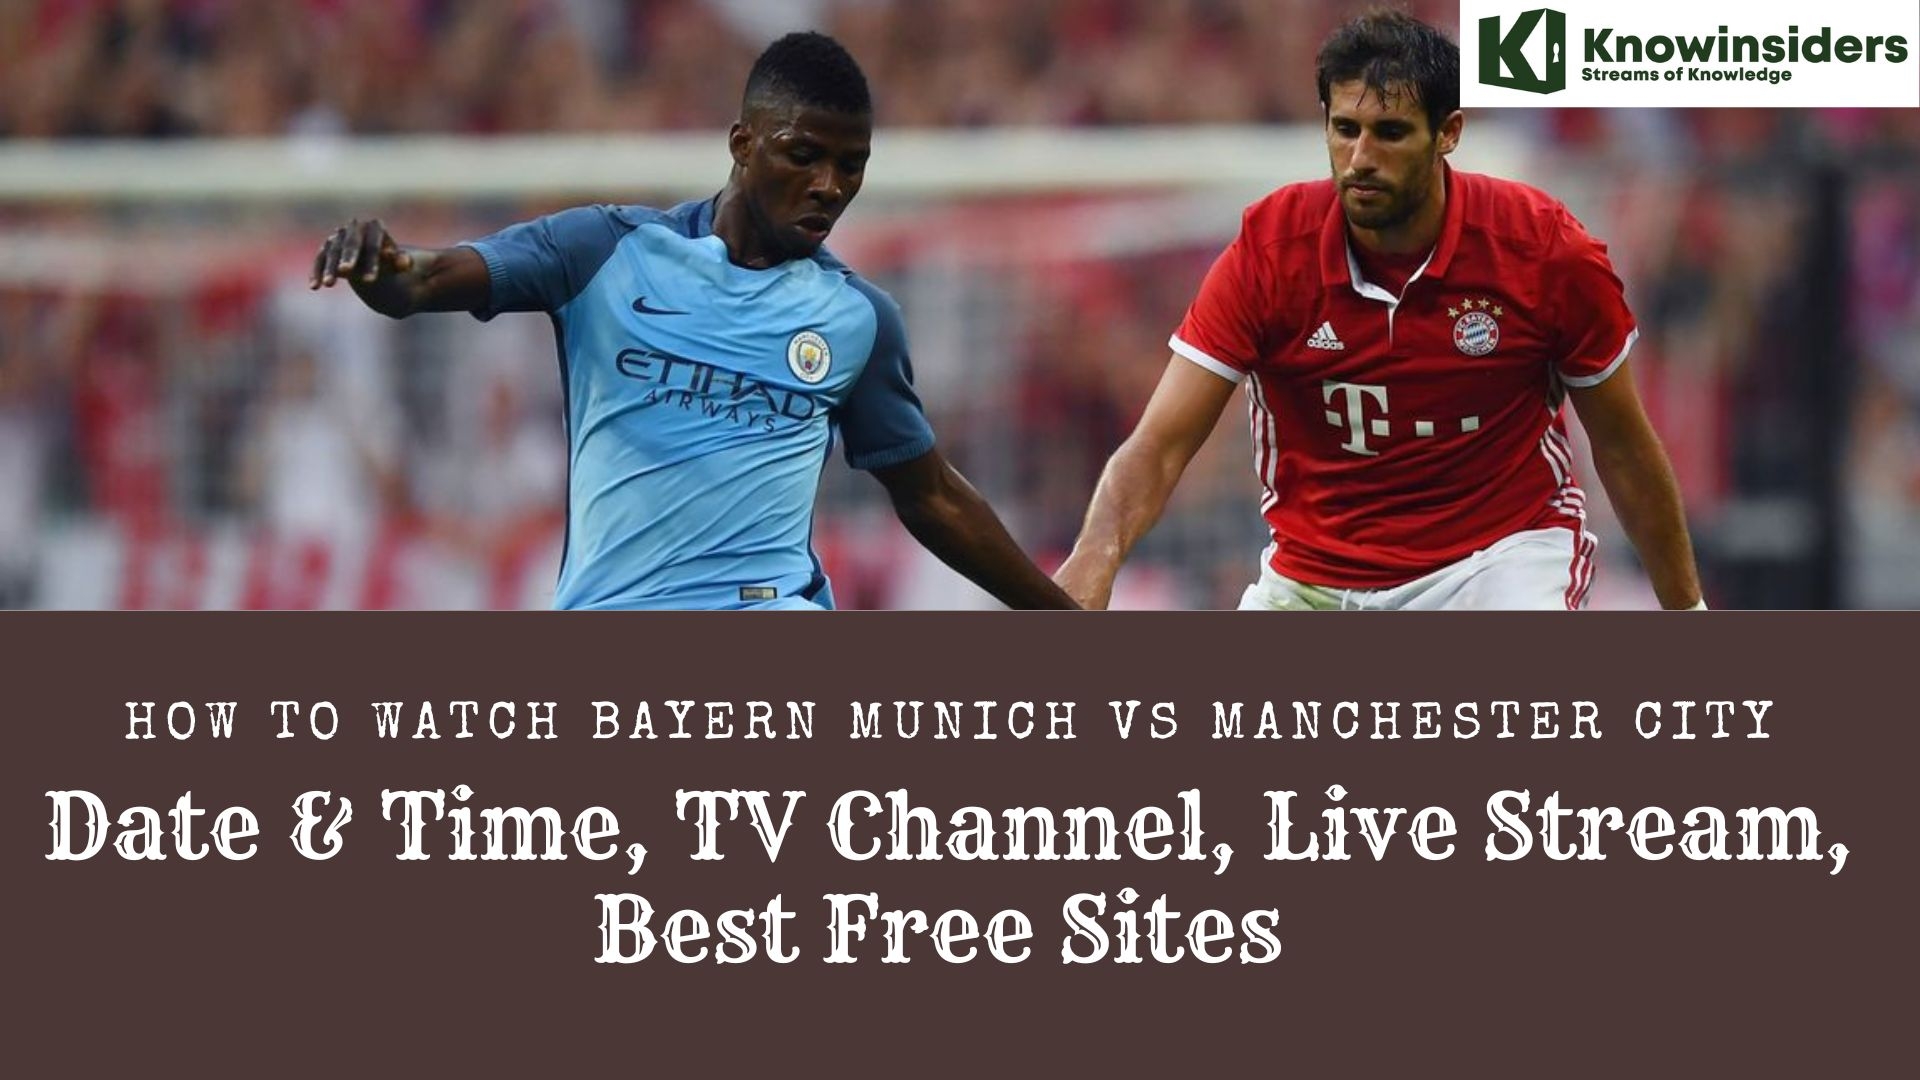 How To Watch Bayern Munich vs Manchester City: Date & Time, TV Channel, Live Stream, Best Free Sites  Knowinsiders.com